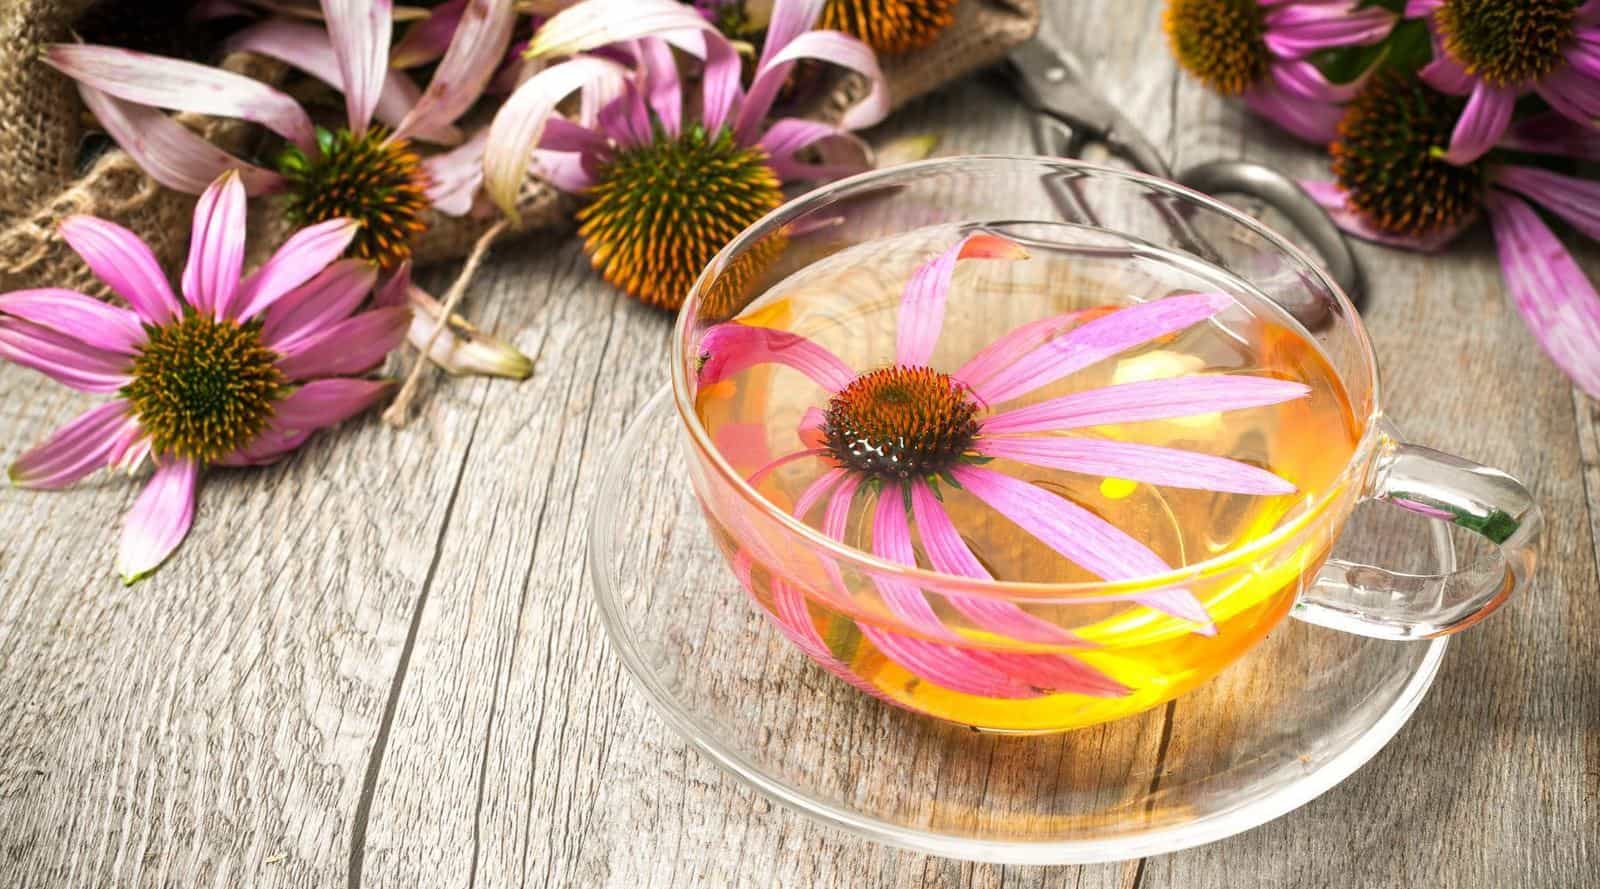 what is echinacea tea? and can it help a cold?